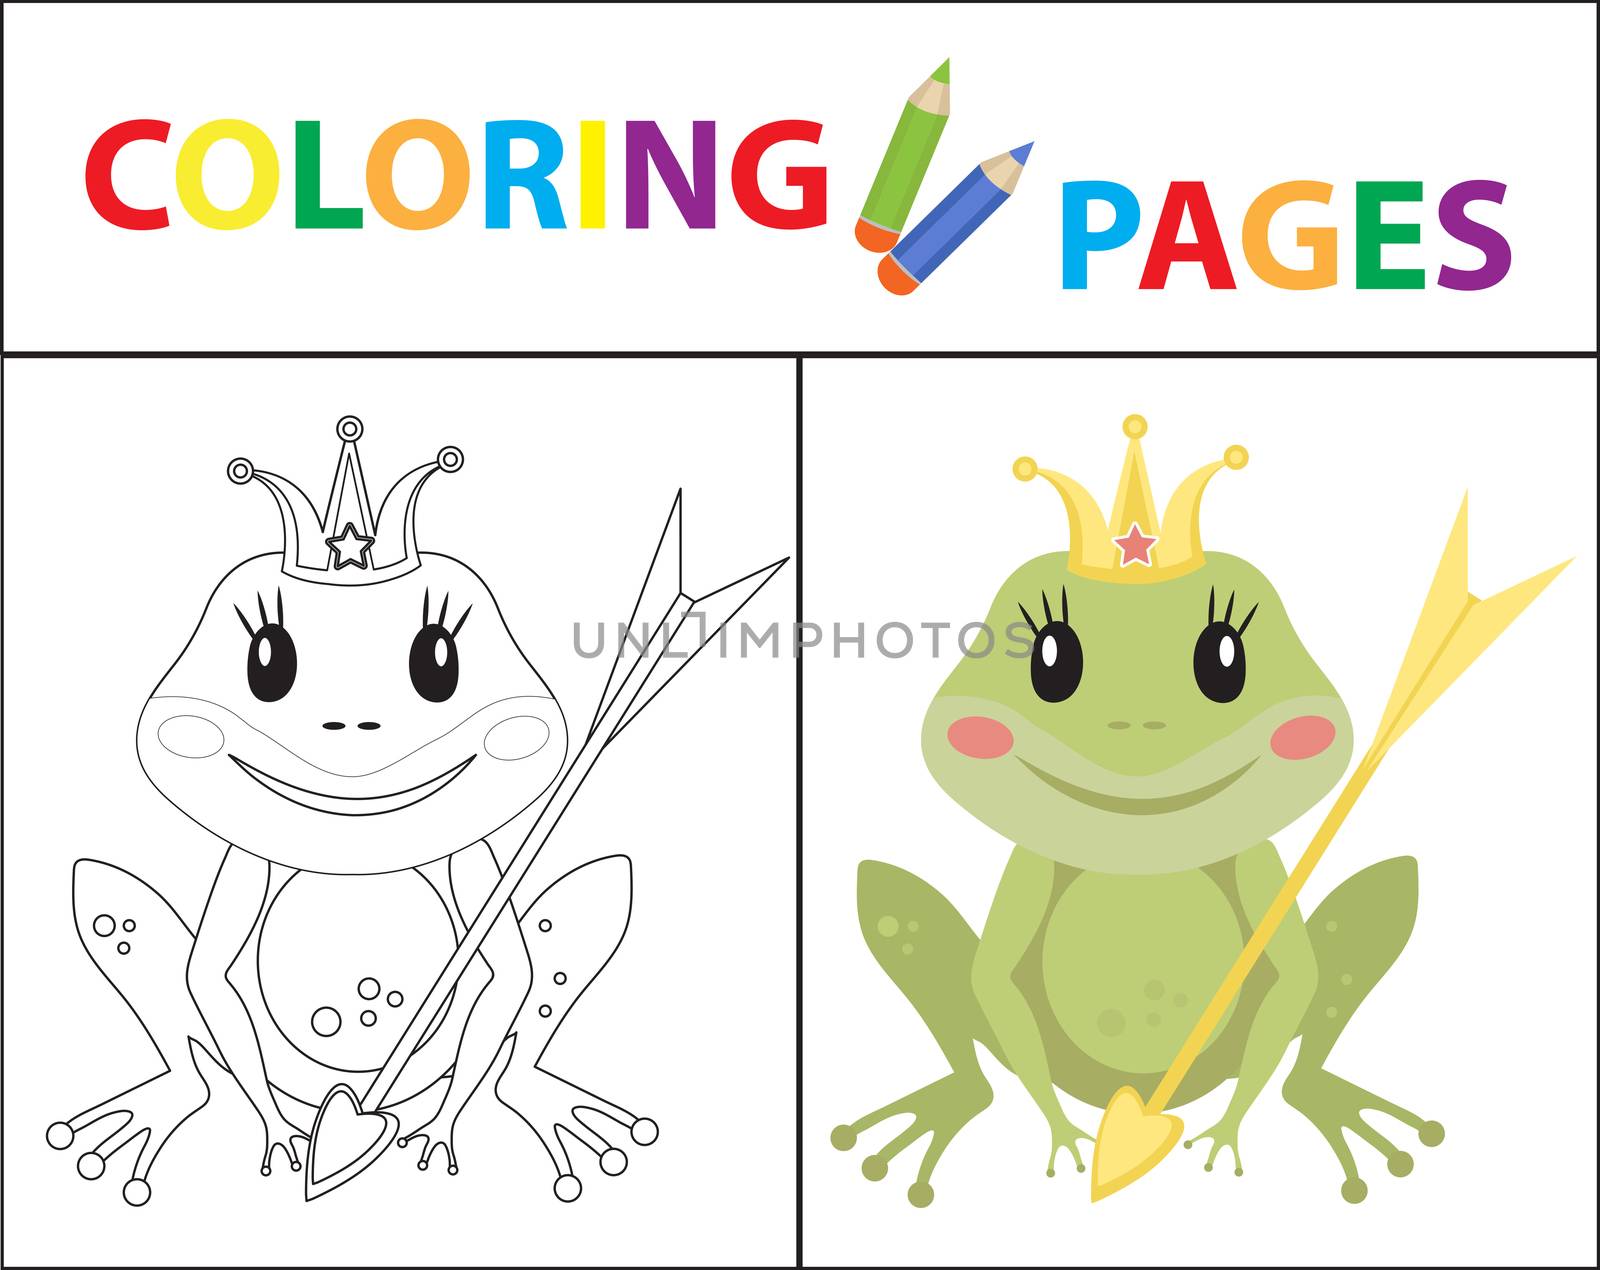 Coloring book page for kids. Frog princess Sketch outline and color version. Childrens education. illustration. by lucia_fox